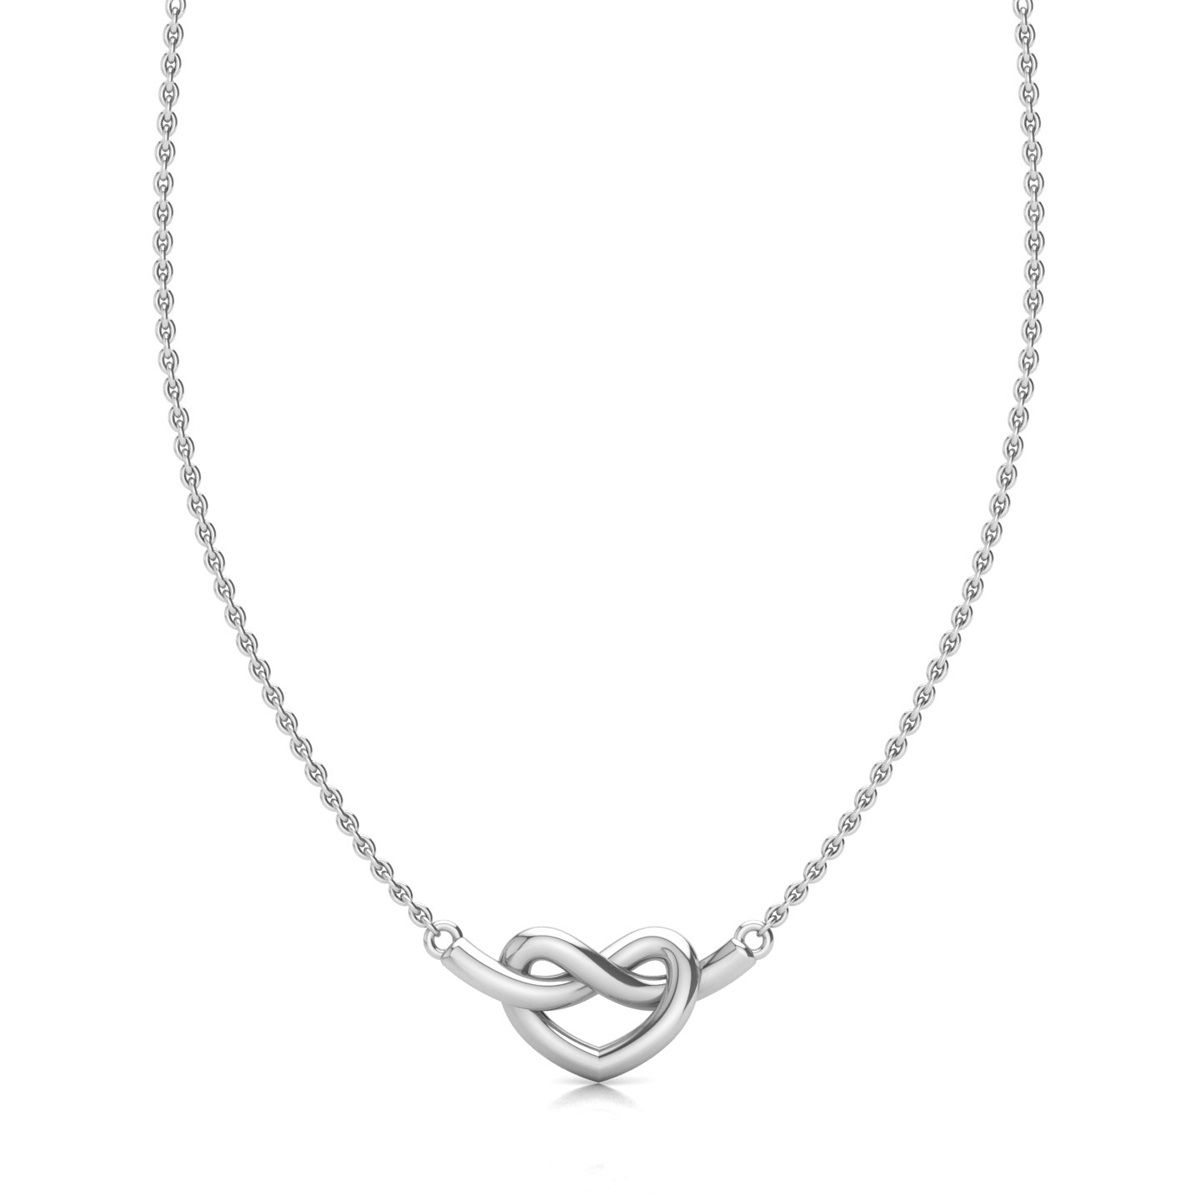 Buy CRAFTMERCI - Knot Silver Necklace Chain for Women - Light Weight Pendant  for Everyday Wear - Makes a Cute Gifts for Women - 925 Silver Jewellery  with BIS Hallmarked Stamp at Amazon.in